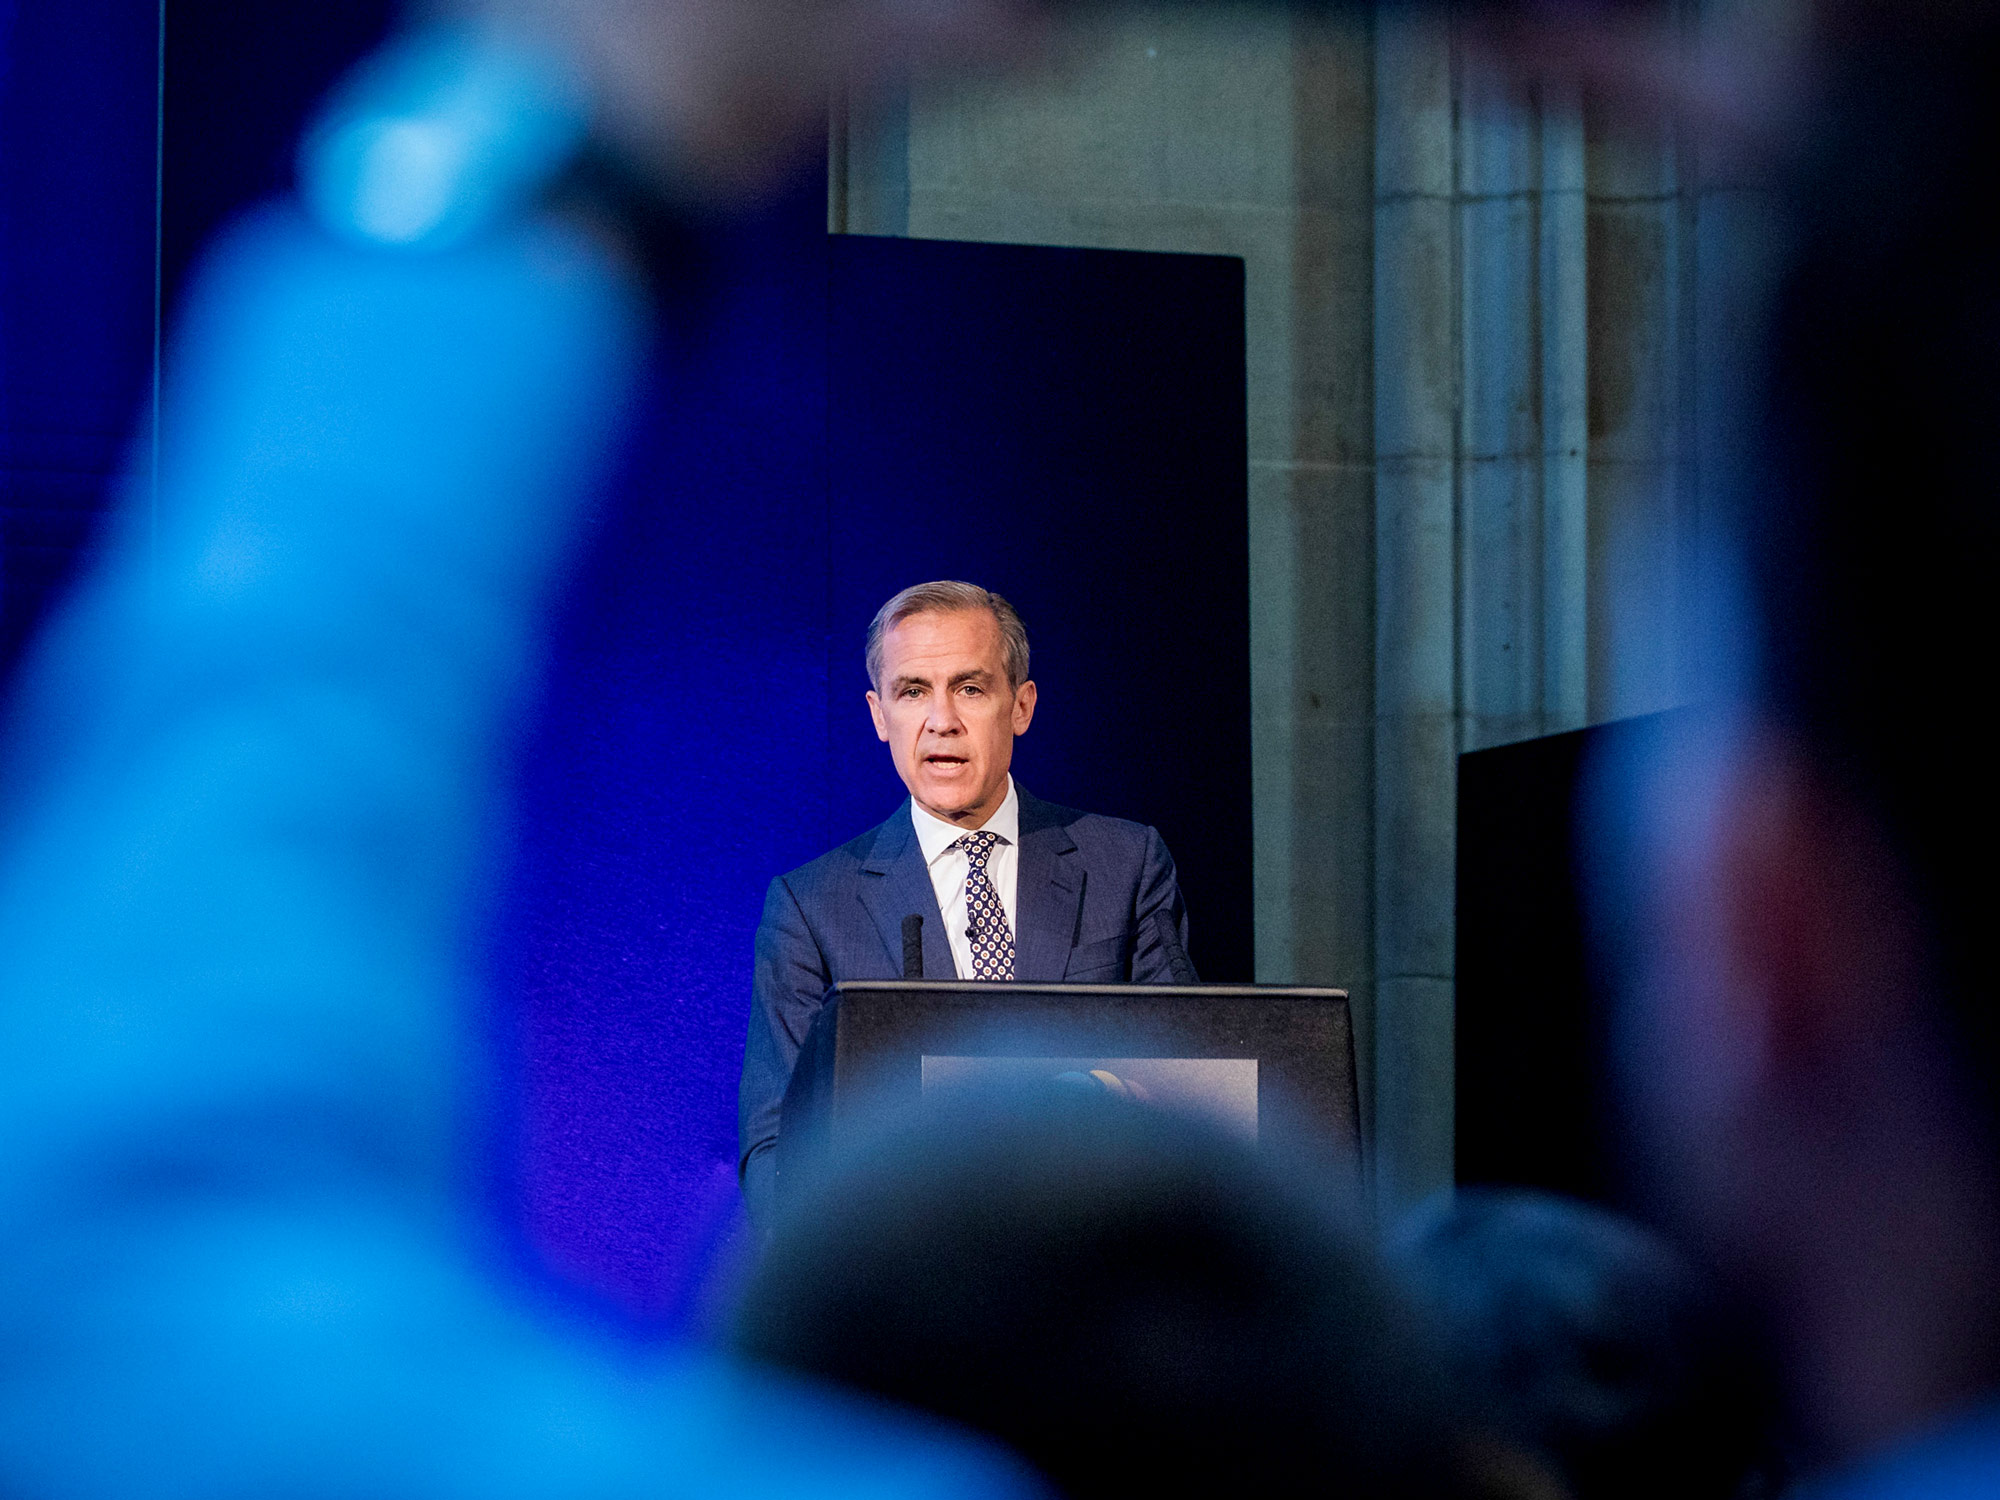 Mark Carney speaks at the Innovate Finance Global Summit in London, on April 29.